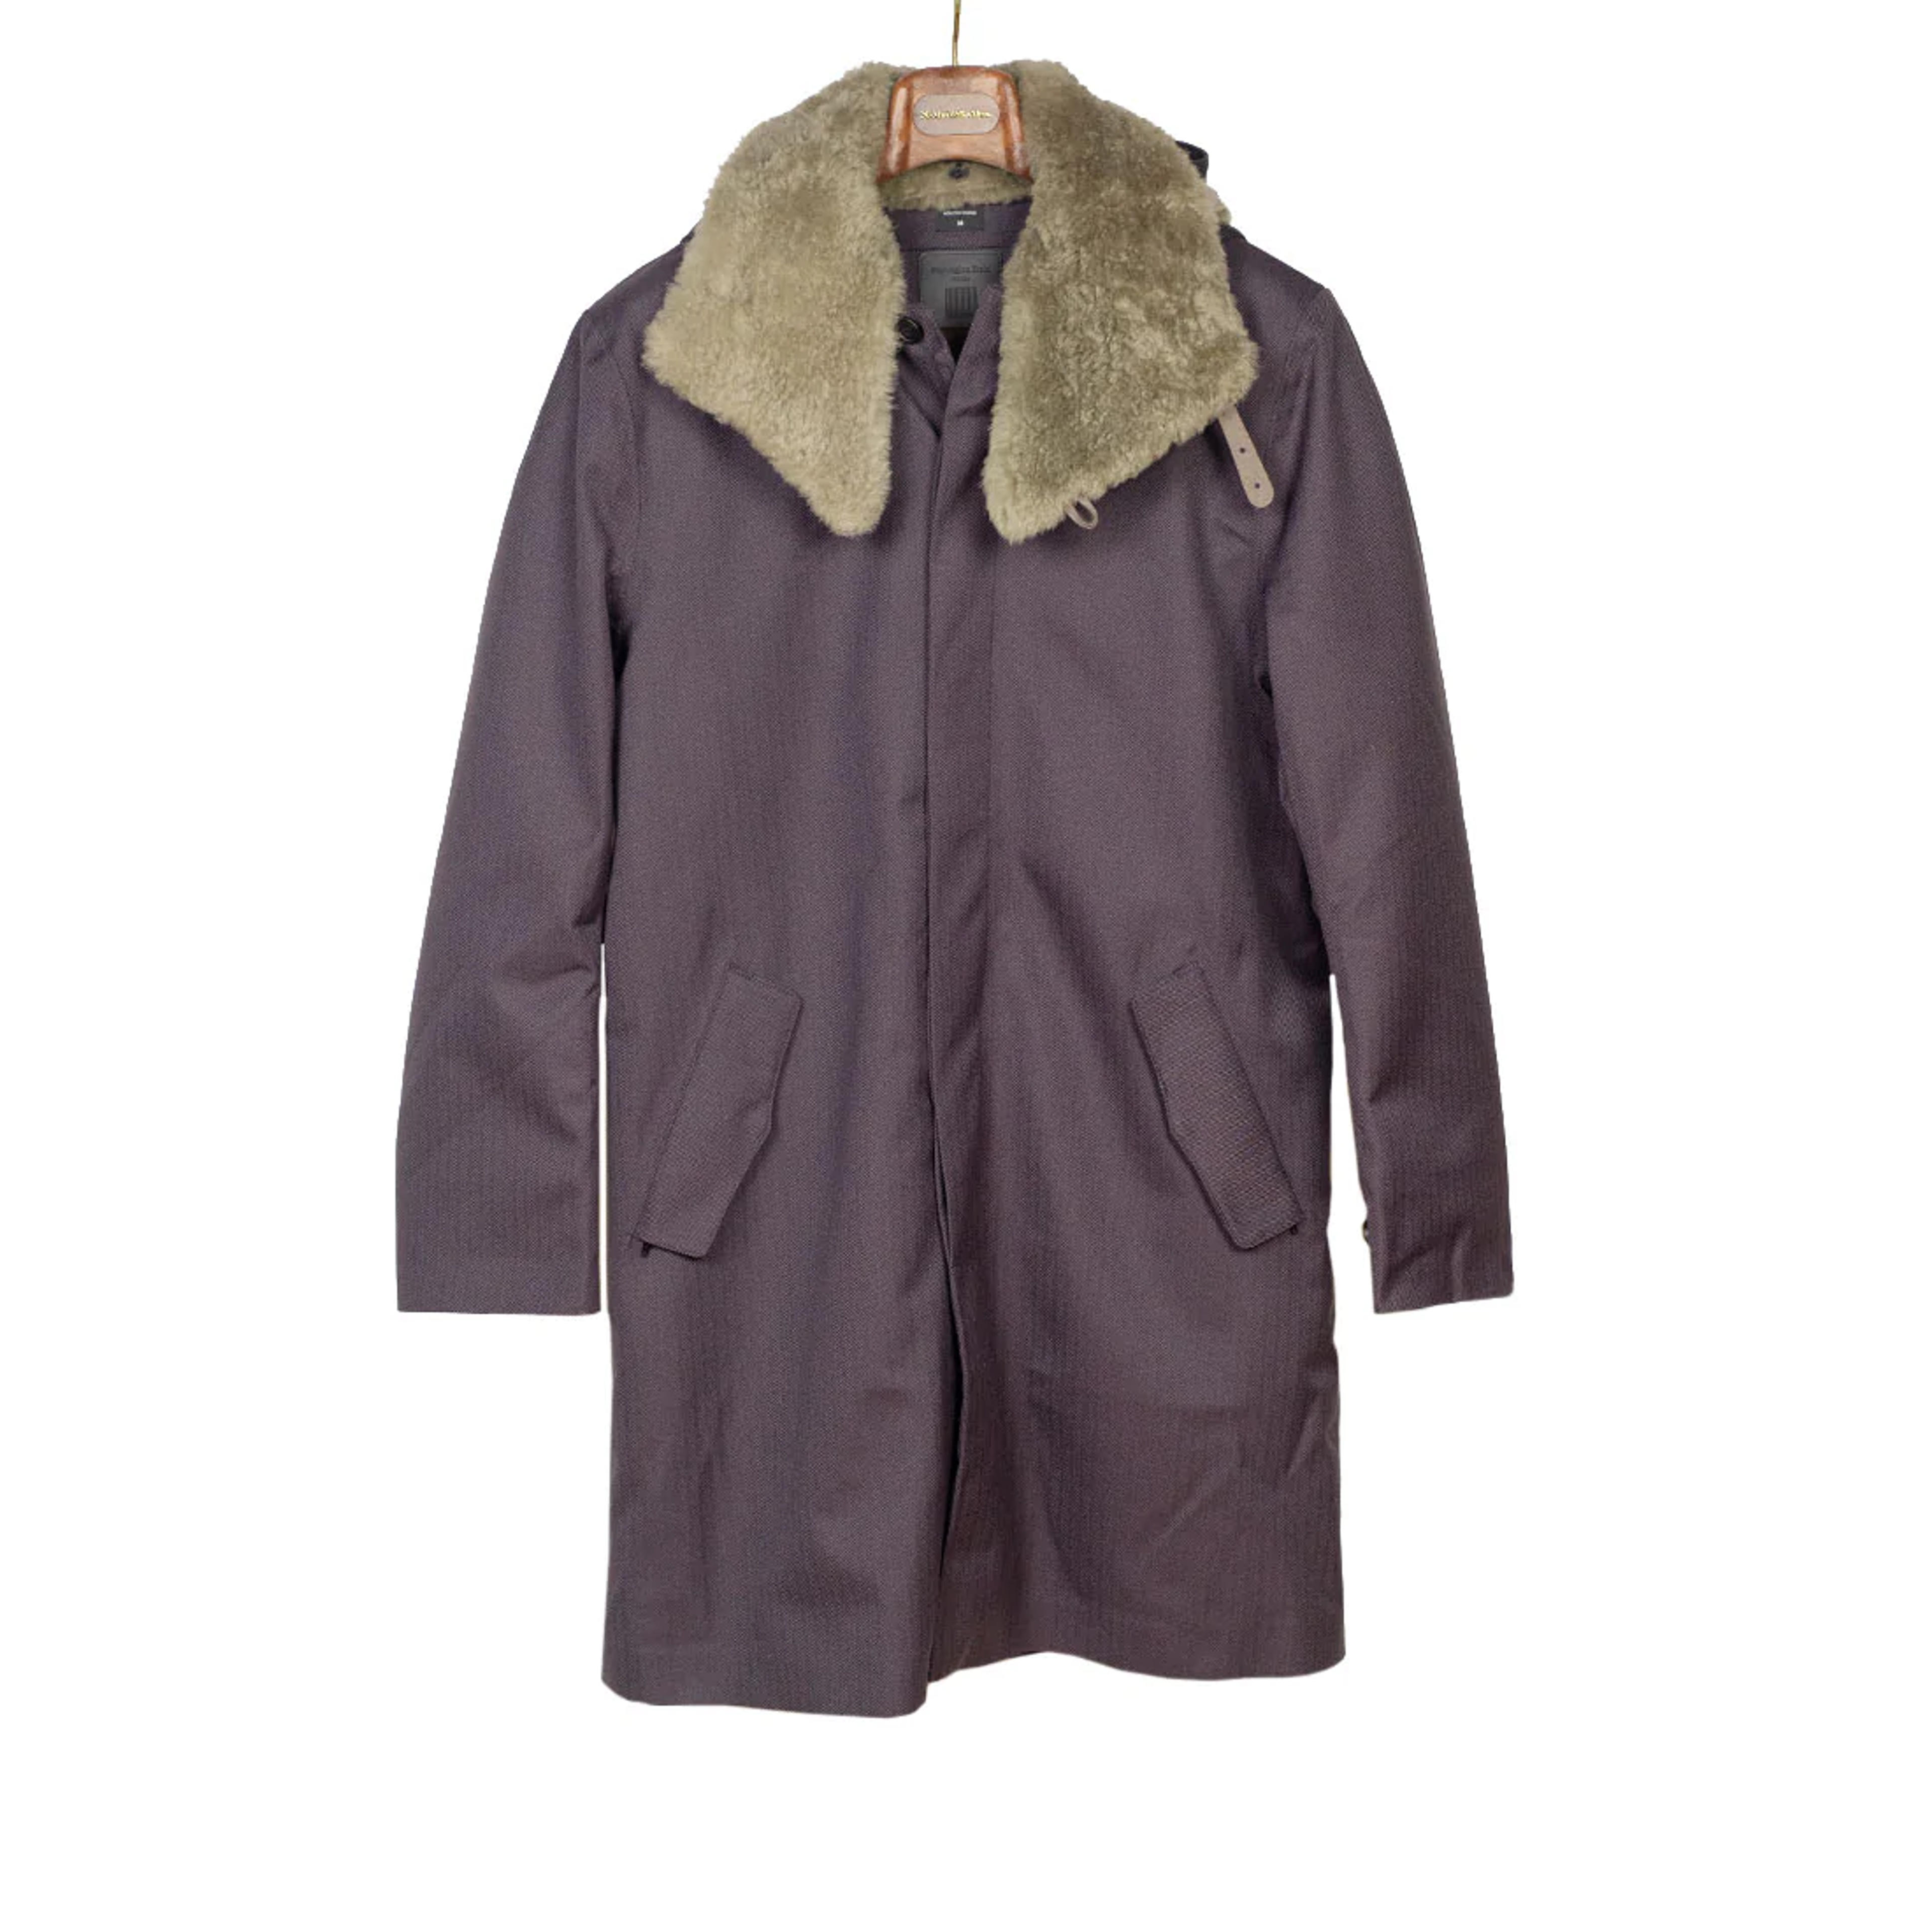 Aubergine herringbone Moscow raincoat with shearling collar and Arctic padded lining - S